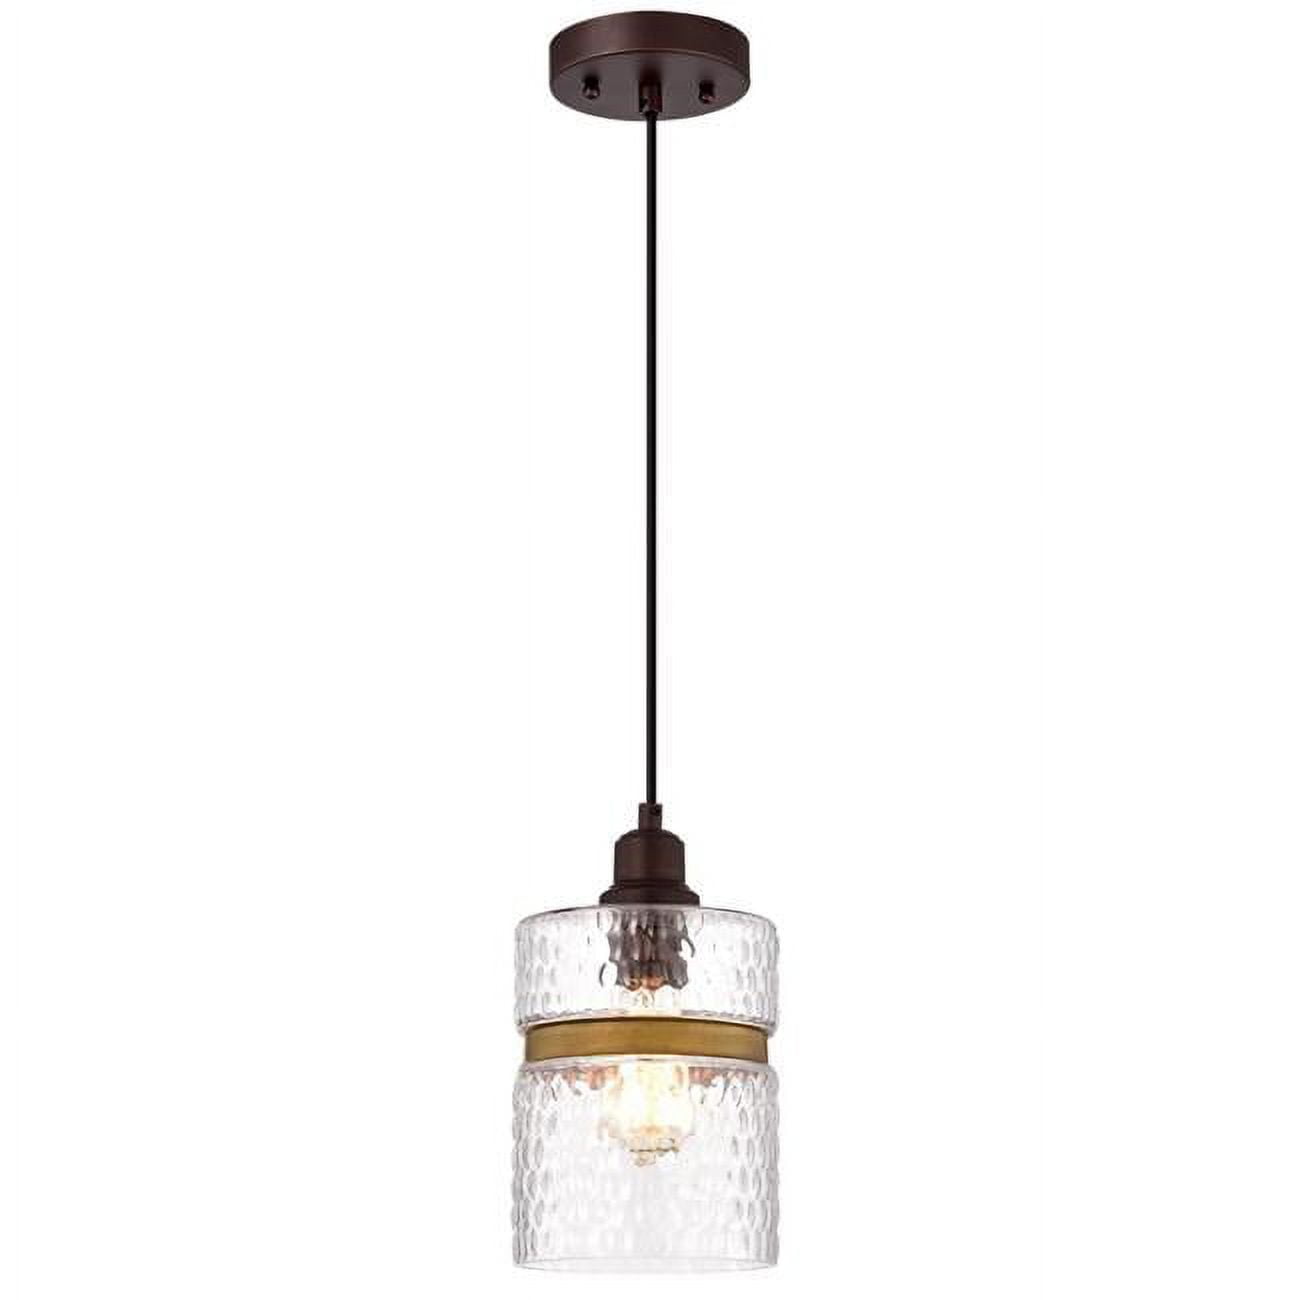 6 in. Brielle Transitional 1 Light Mini Pendant Ceiling Fixture, Oil Rubbed Bronze -  FeeltheGlow, FE2826890